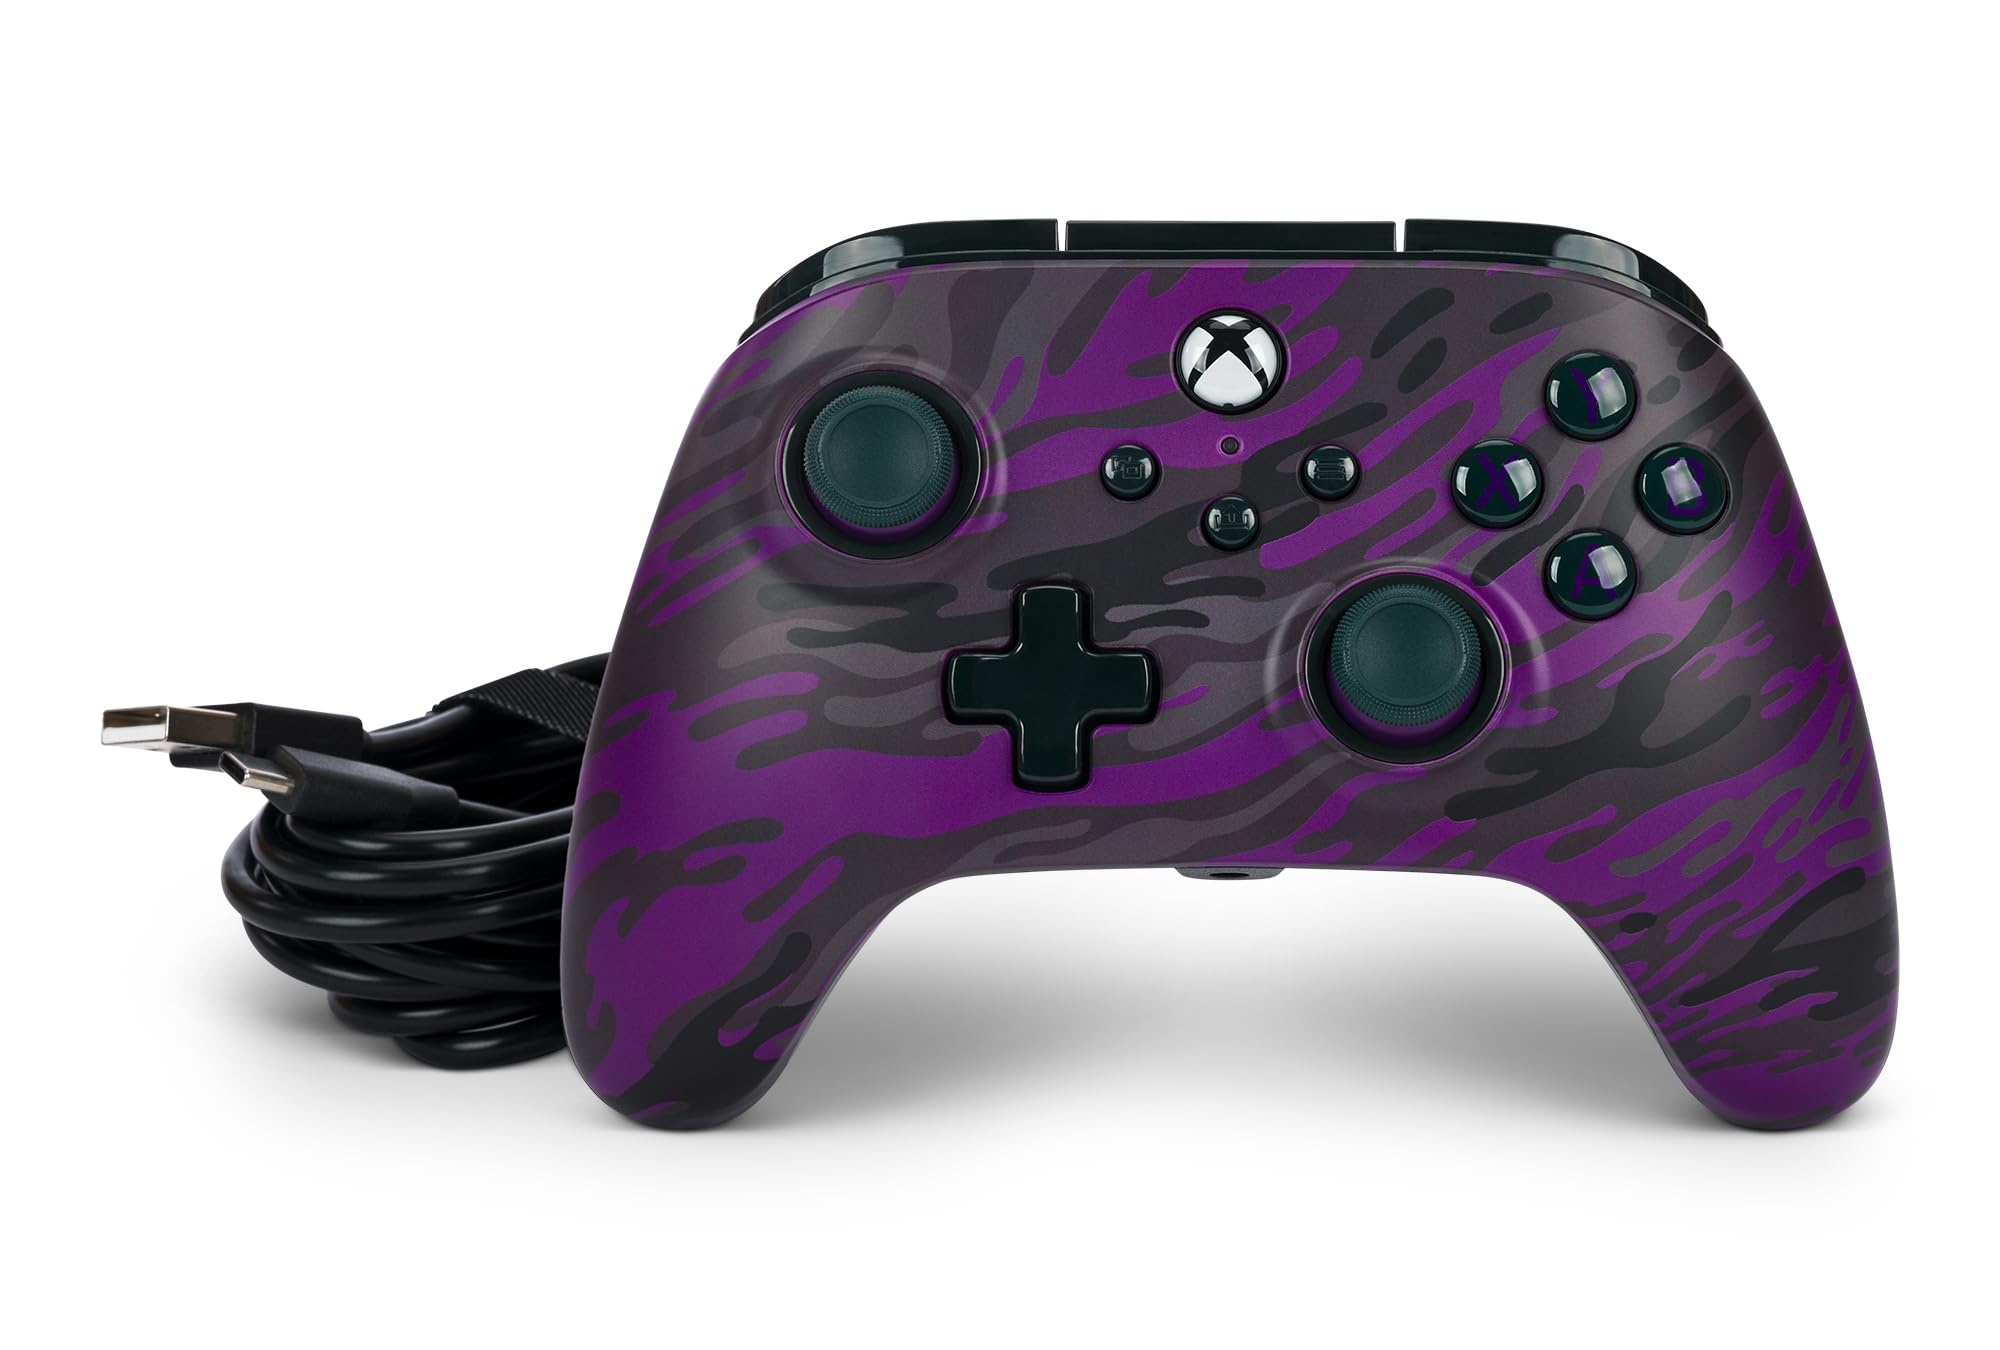 PowerA Advantage Wired Controller for Xbox Series X|S - Purple Camo, Xbox Controller with Detachable 10ft USB-C Cable, Mappable Buttons, Trigger Locks and Rumble Motors, Officially Licensed for Xbox